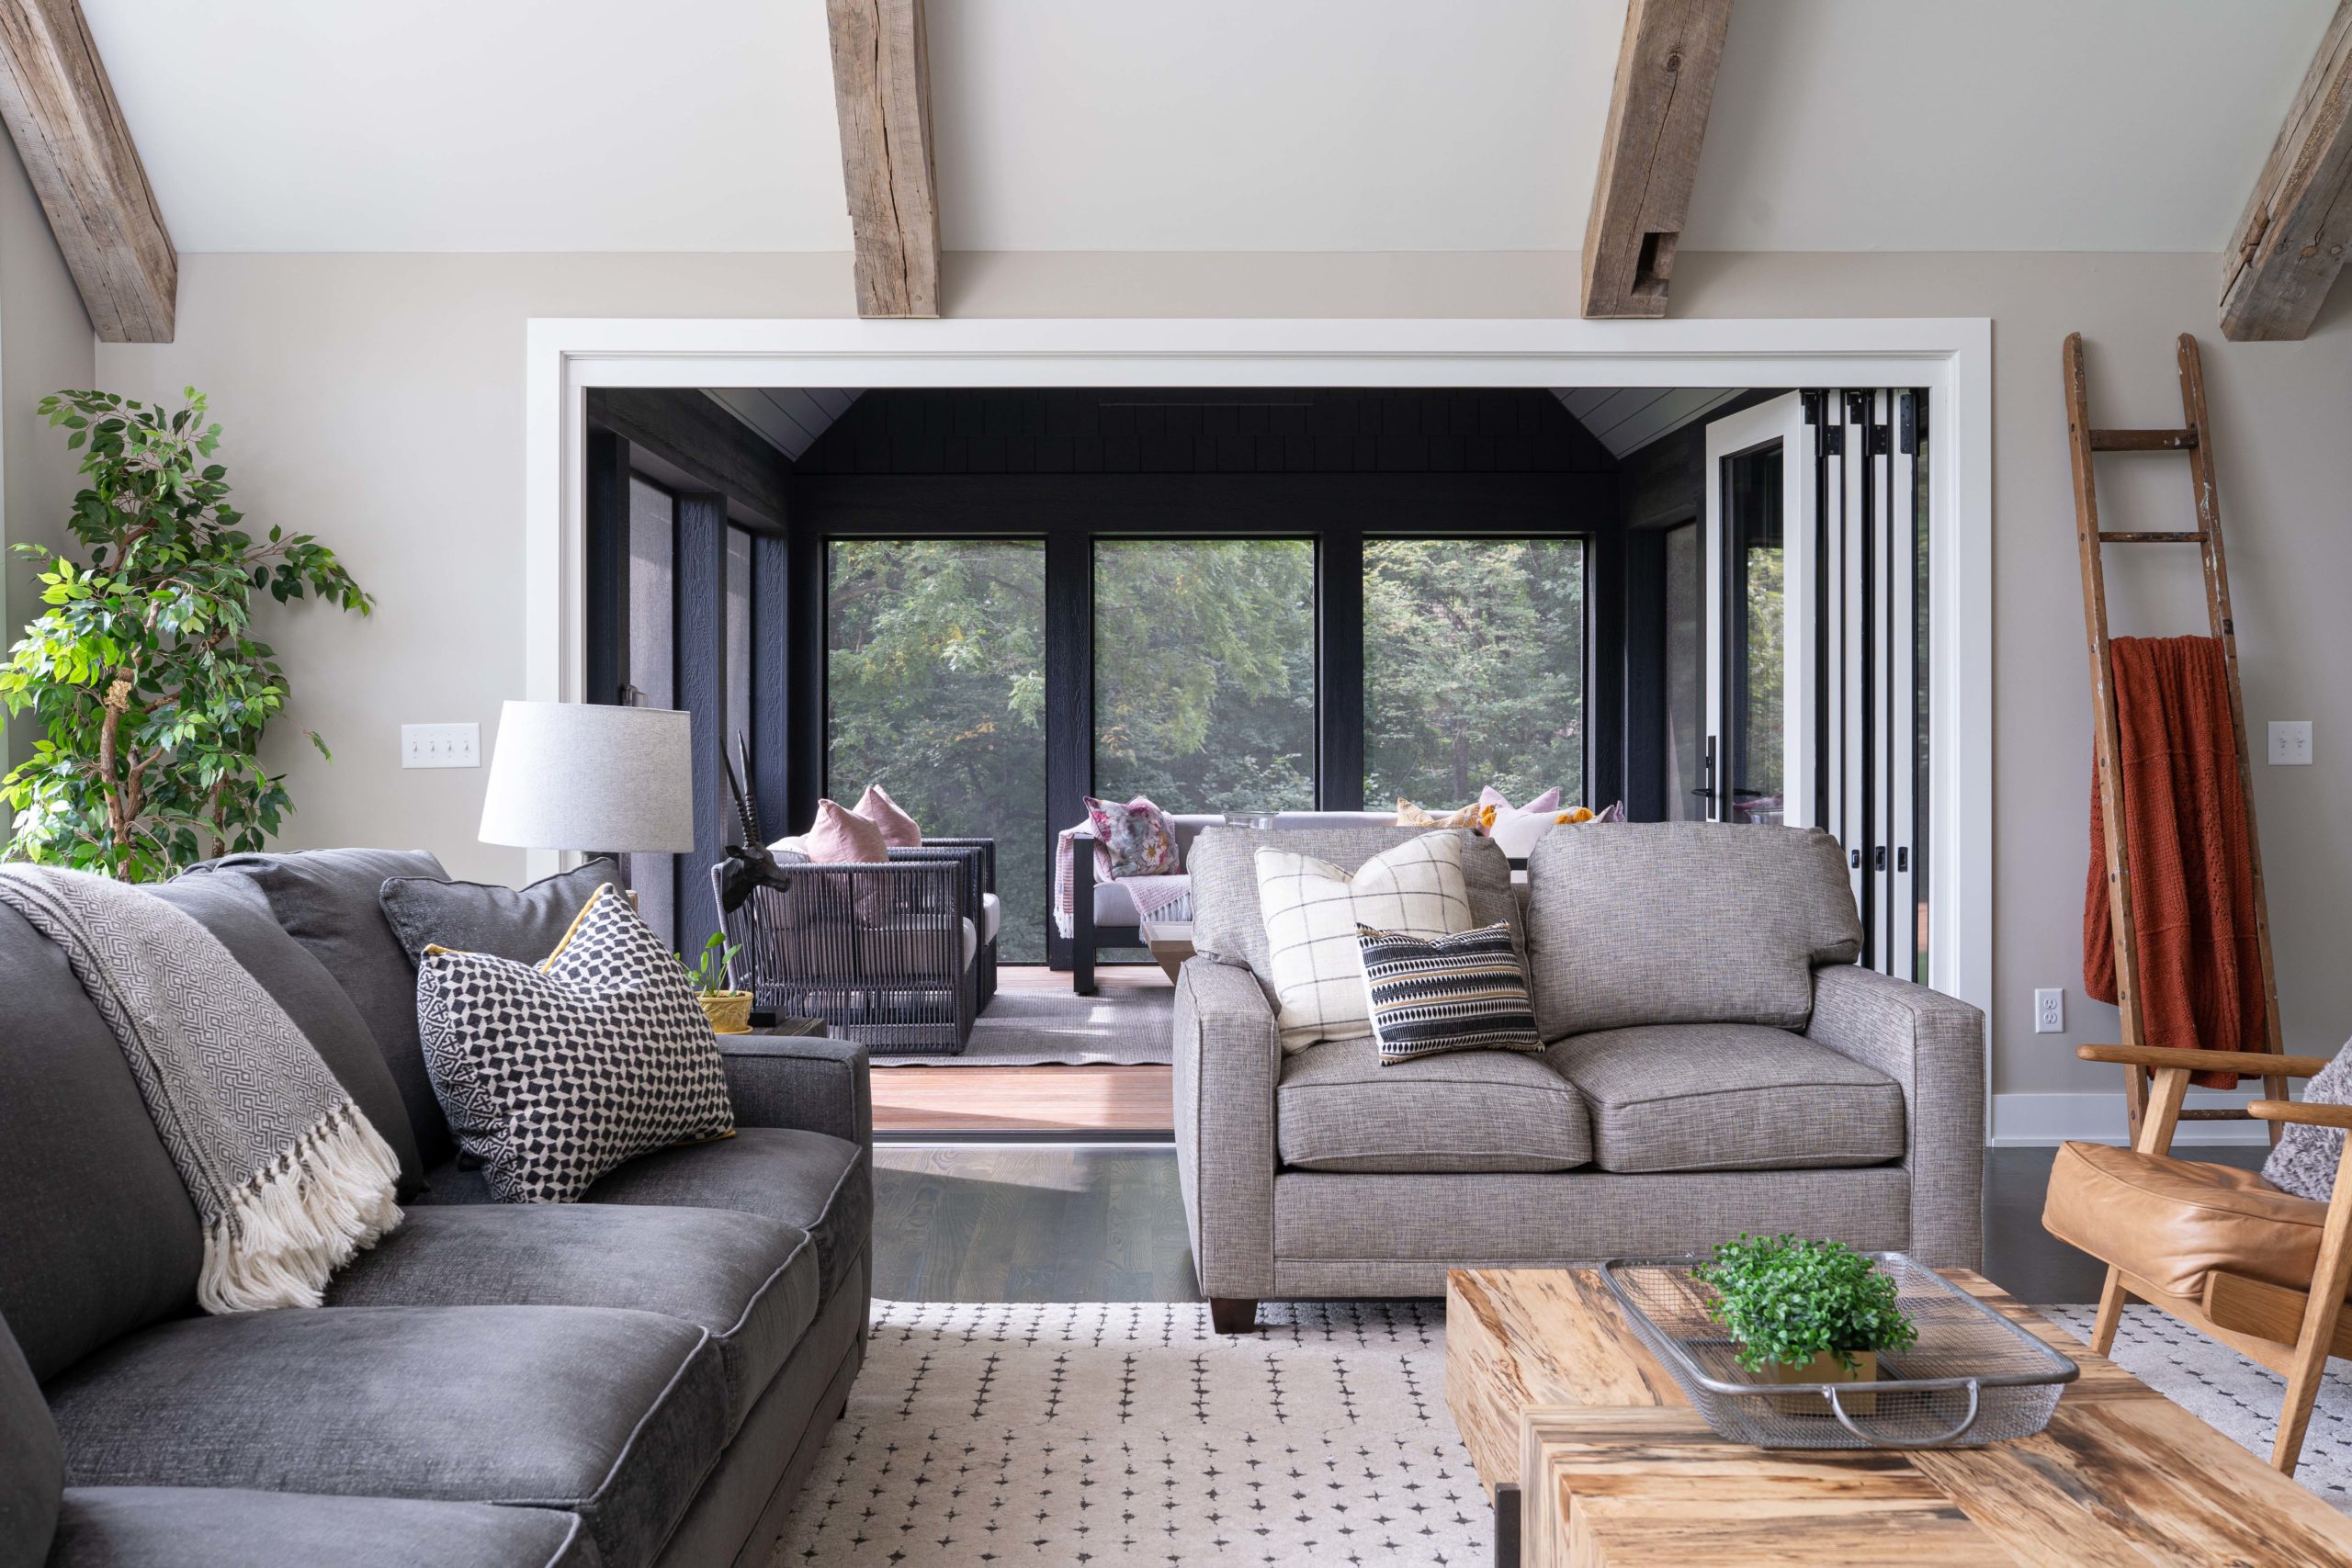 A living room with gray furniture and wooden beams.